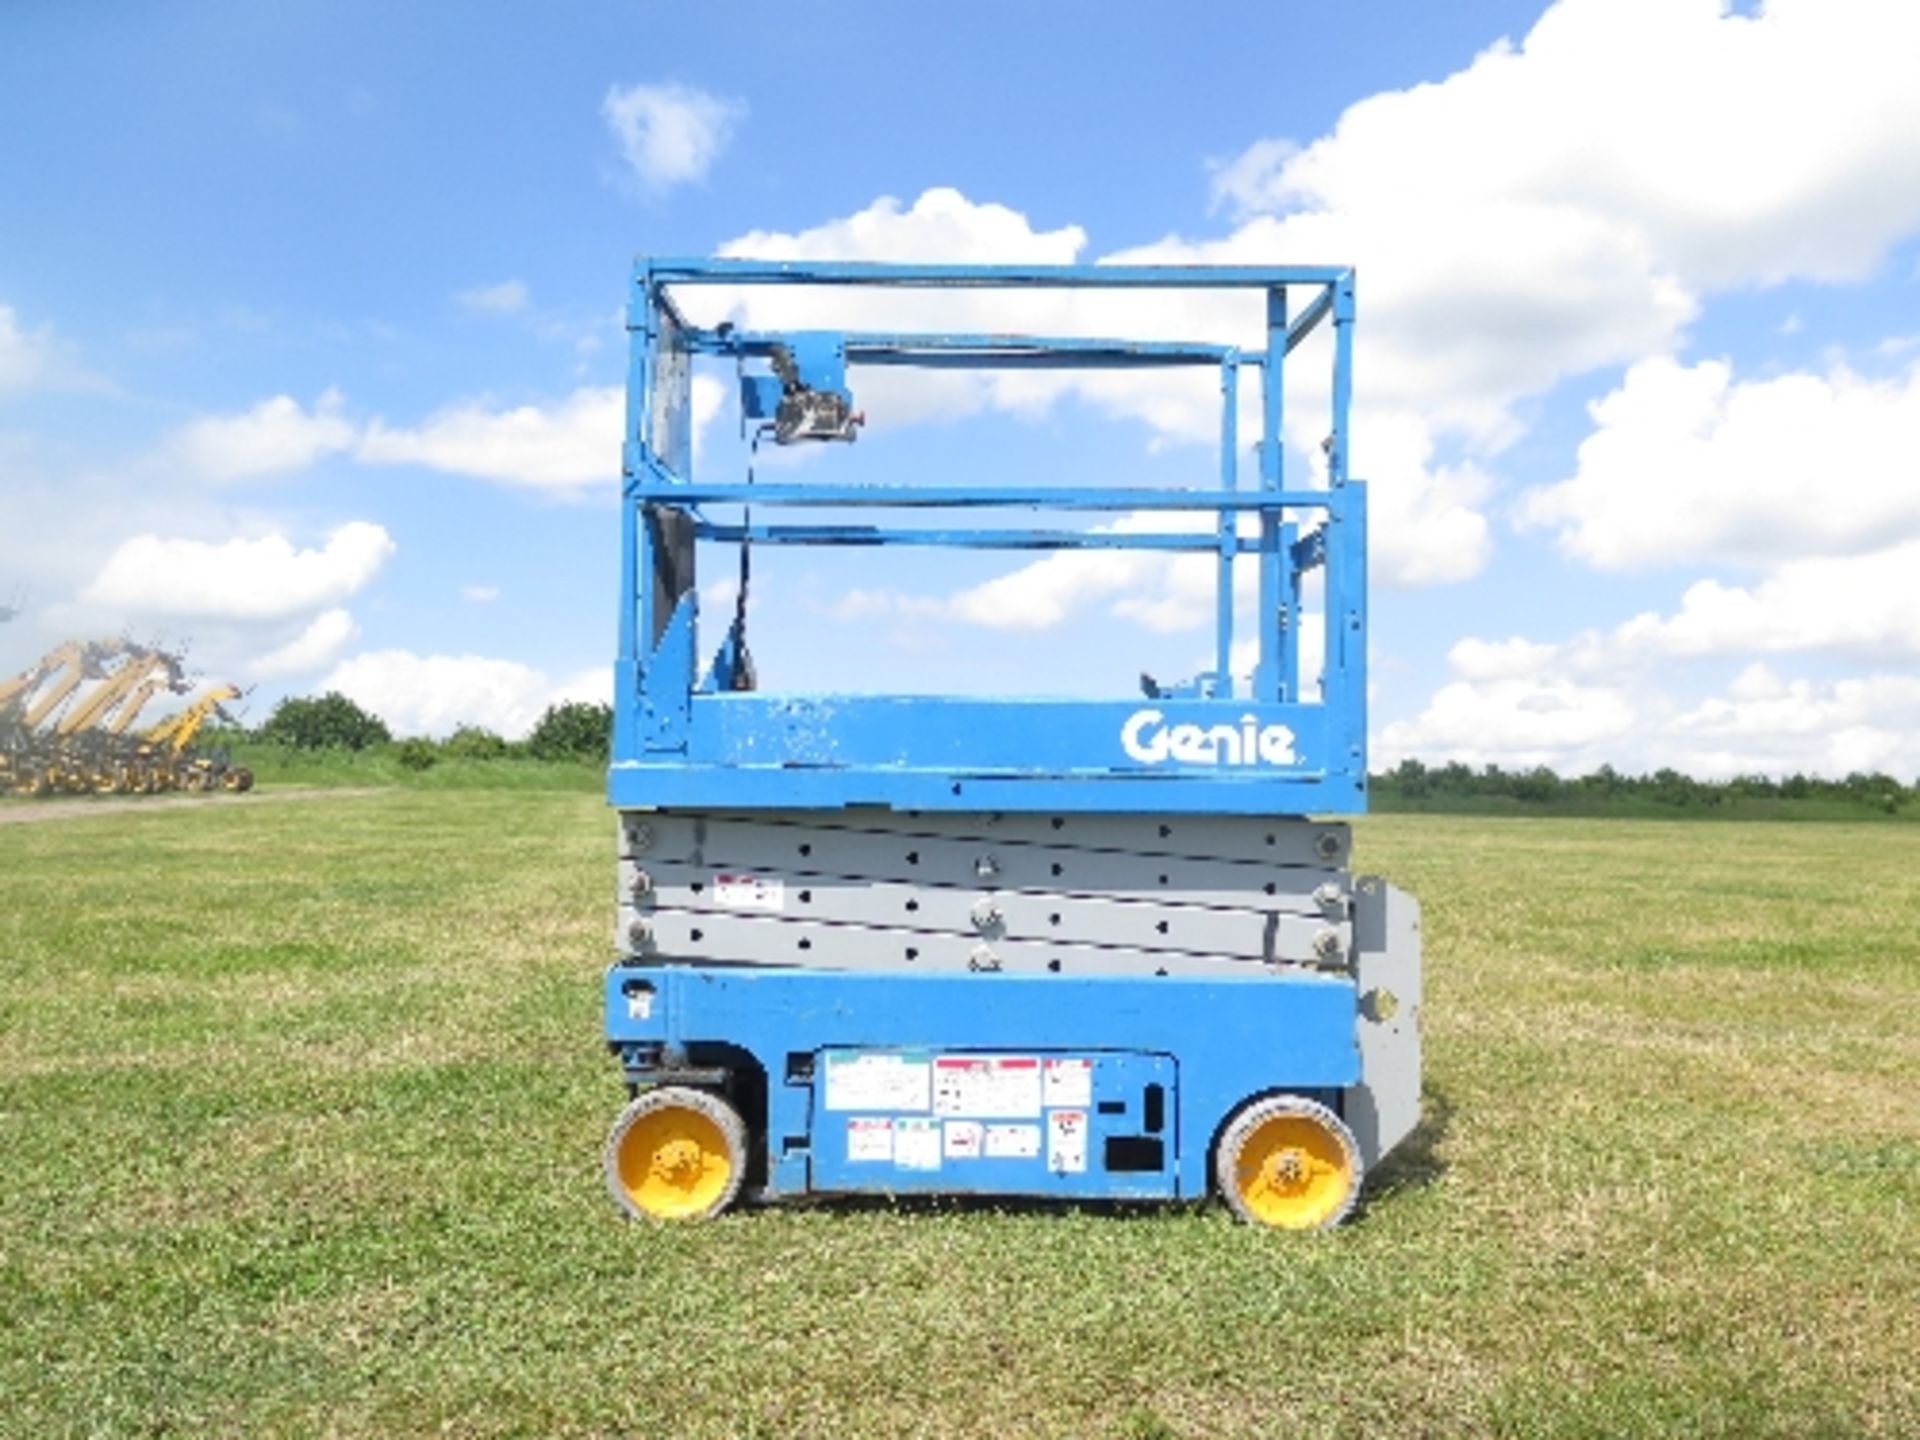 Genie GS1932 scissor lift 2006 151961
BATTERIES TOO FLAT TO ESTABLISH FUNCTIONS
ALL LOTS are